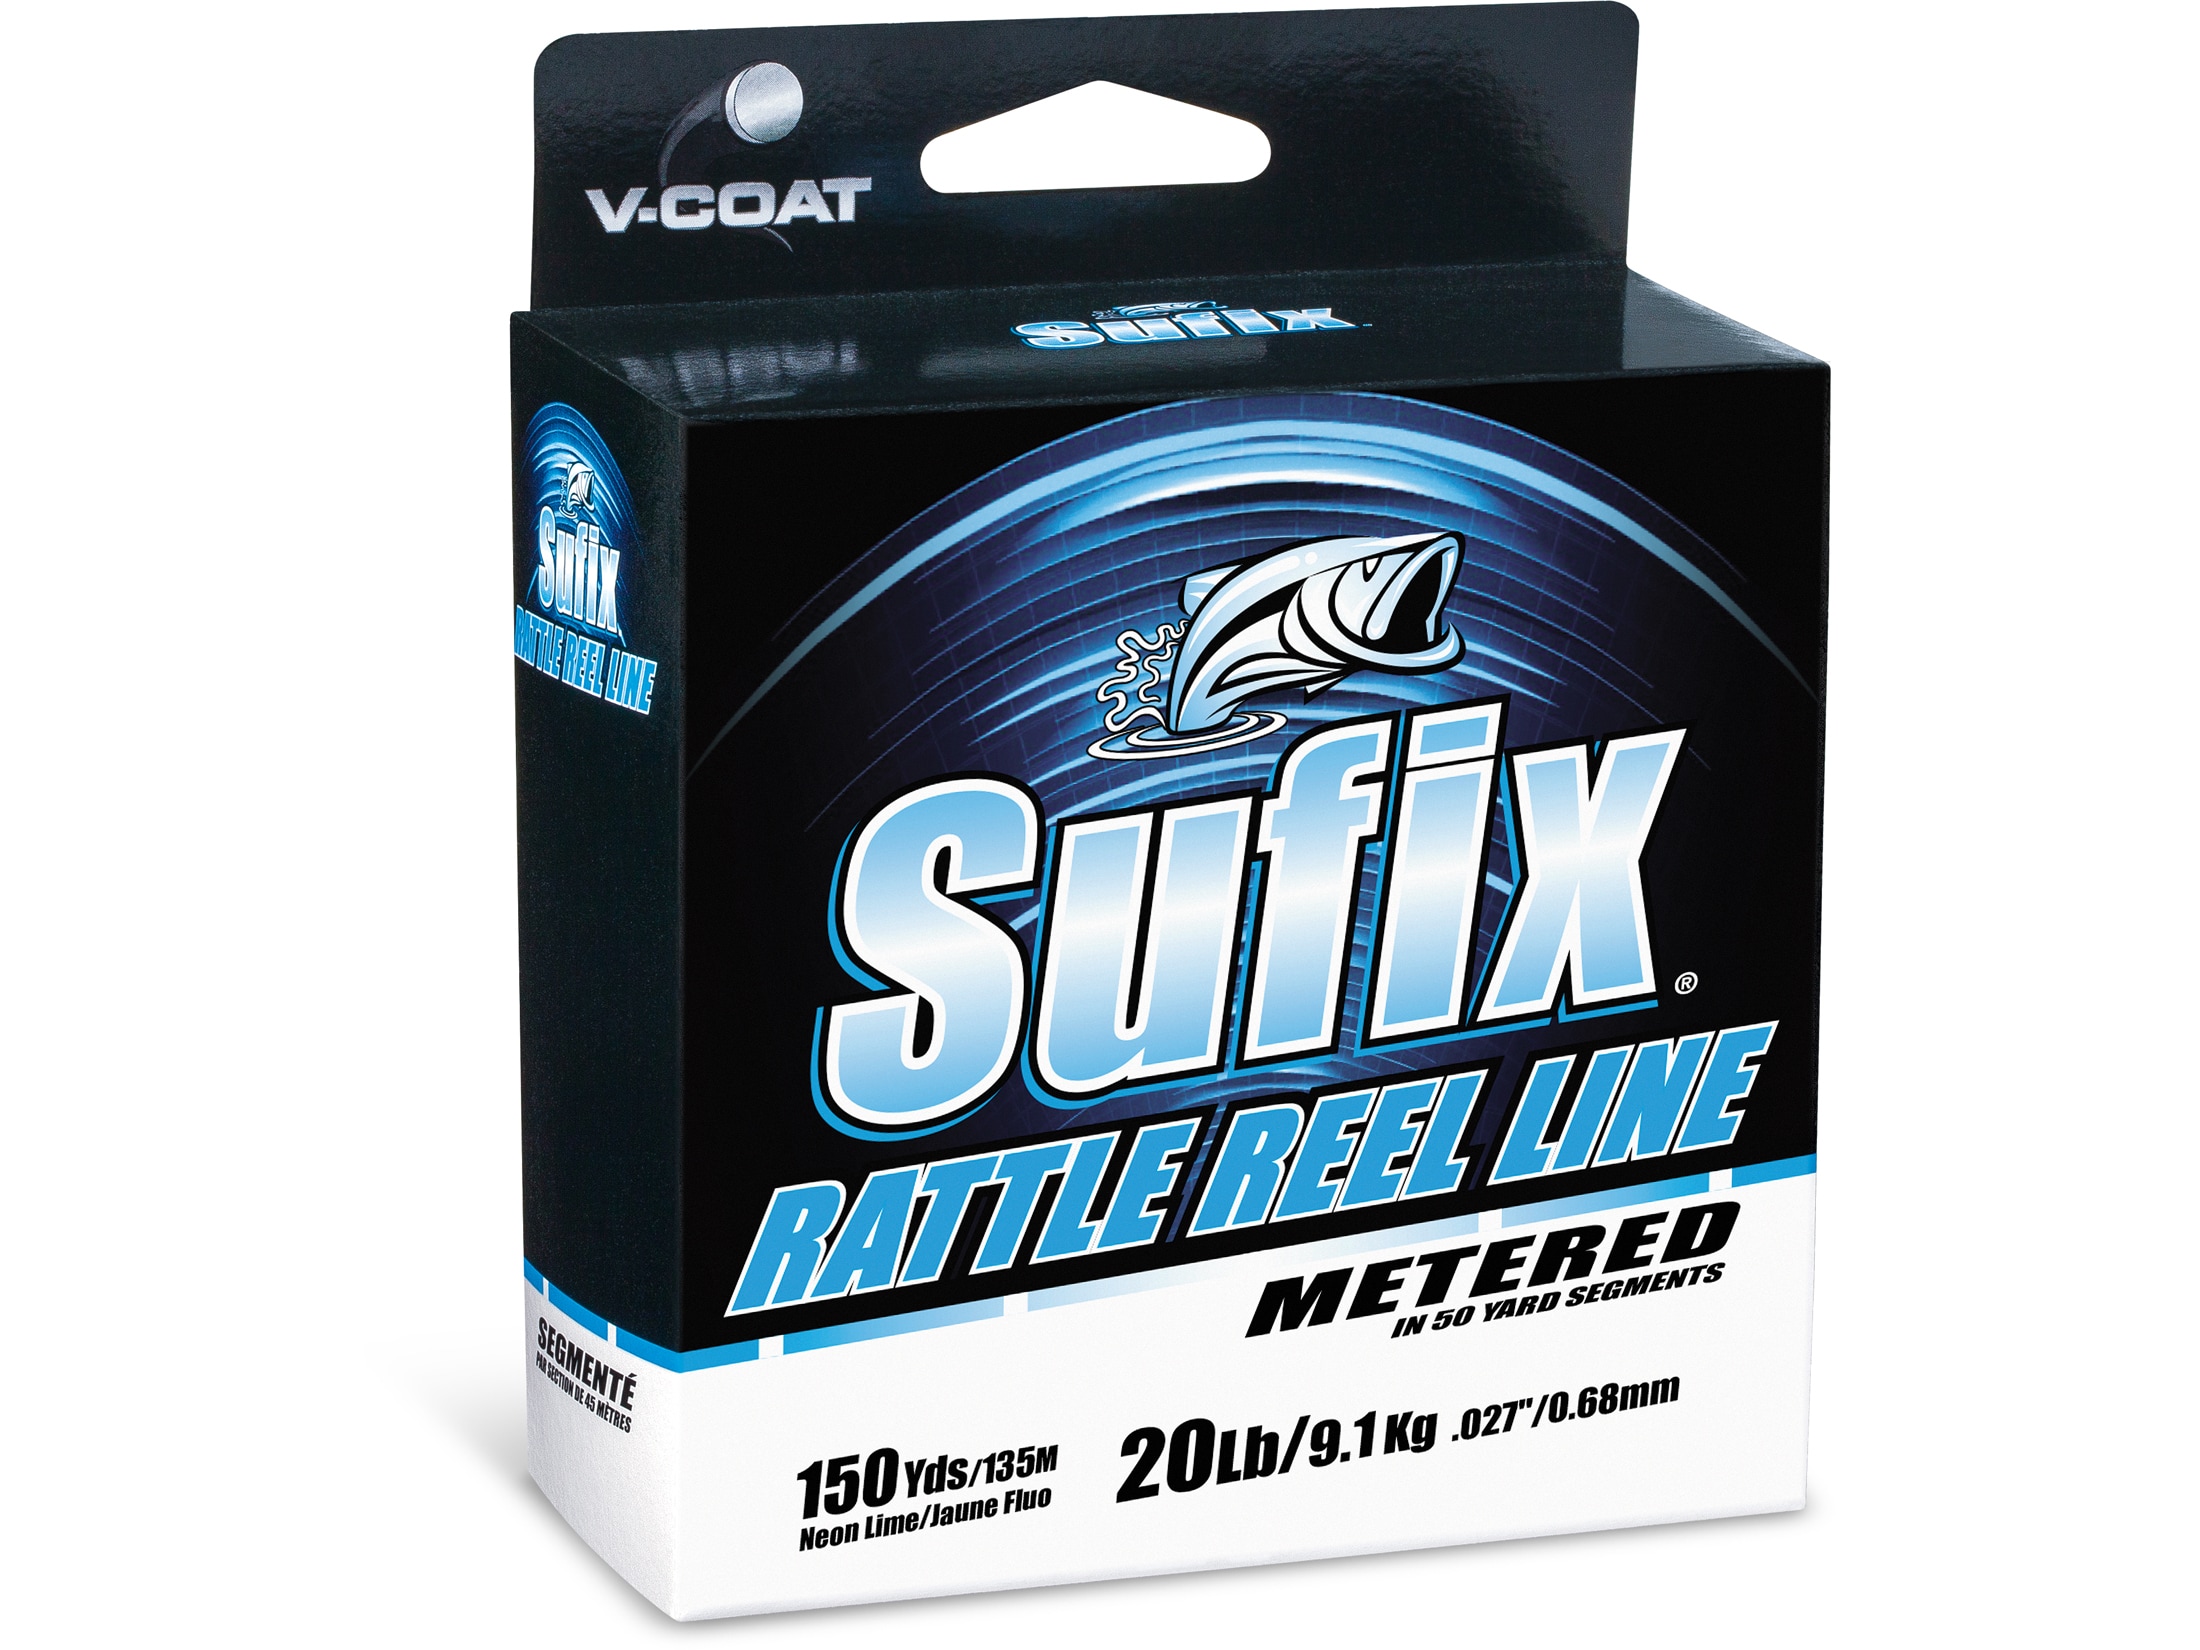 Sufix Rattle Reel Metered V-Coat 30lb Test Neon Fire 150 yards Ice Fishing LIne 